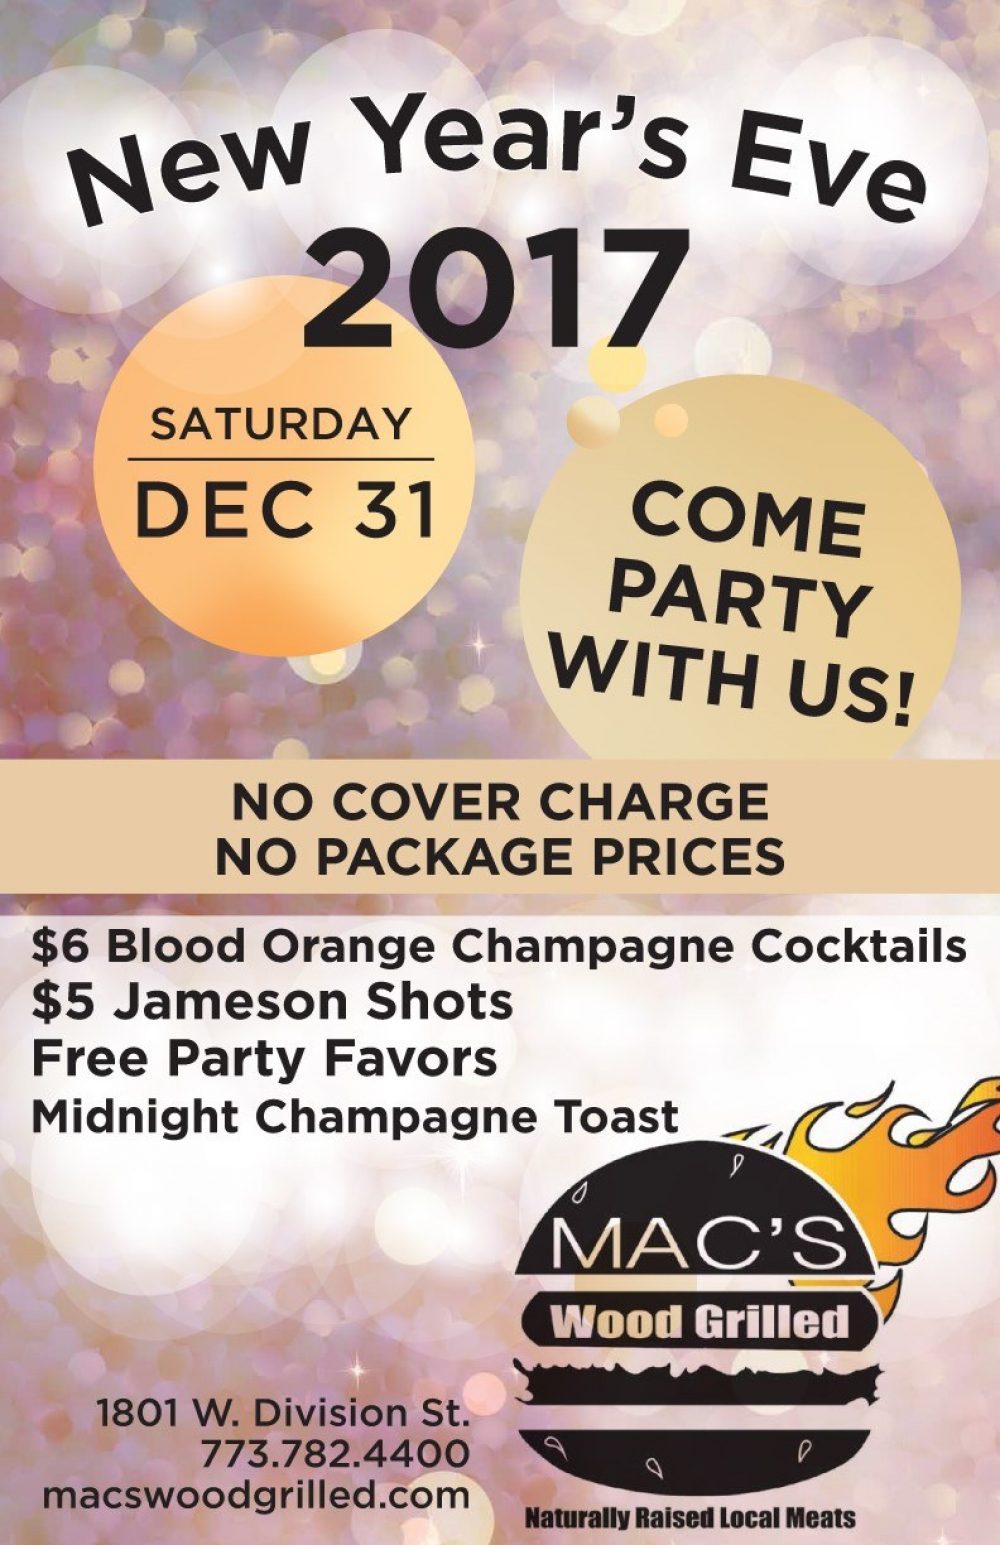 New Year's Eve at Mac's Wood Grilled